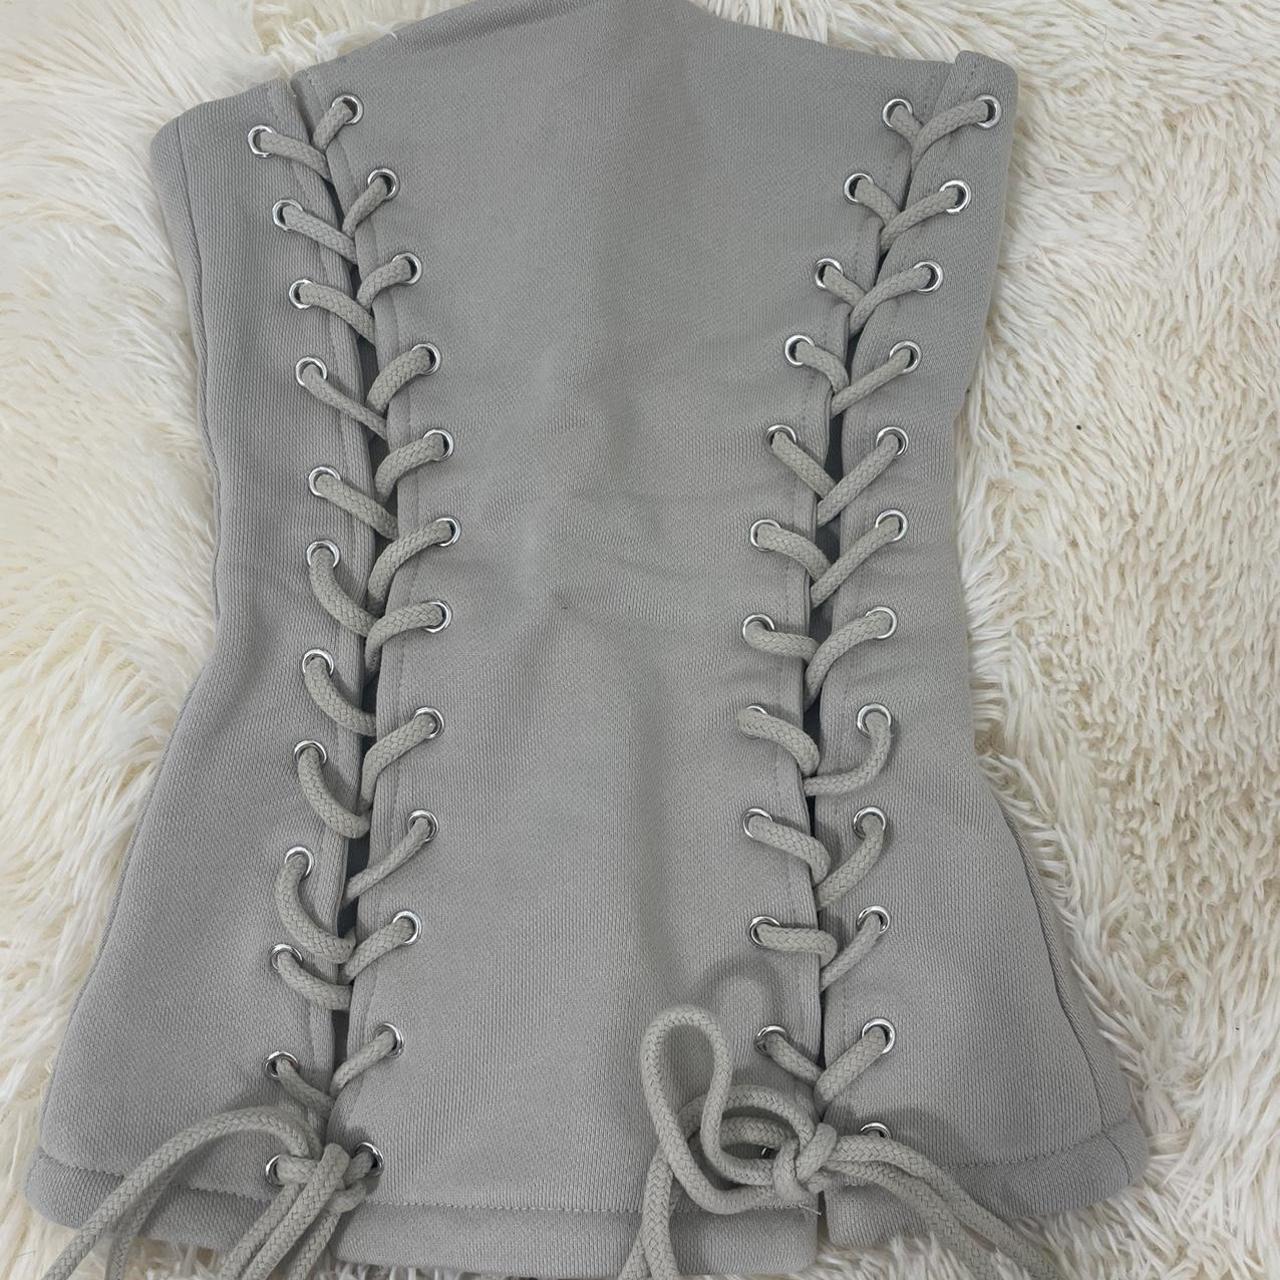 HIDDEN CULT Wynn Laced Up Taupe Corset🖤- Taupe... - Depop